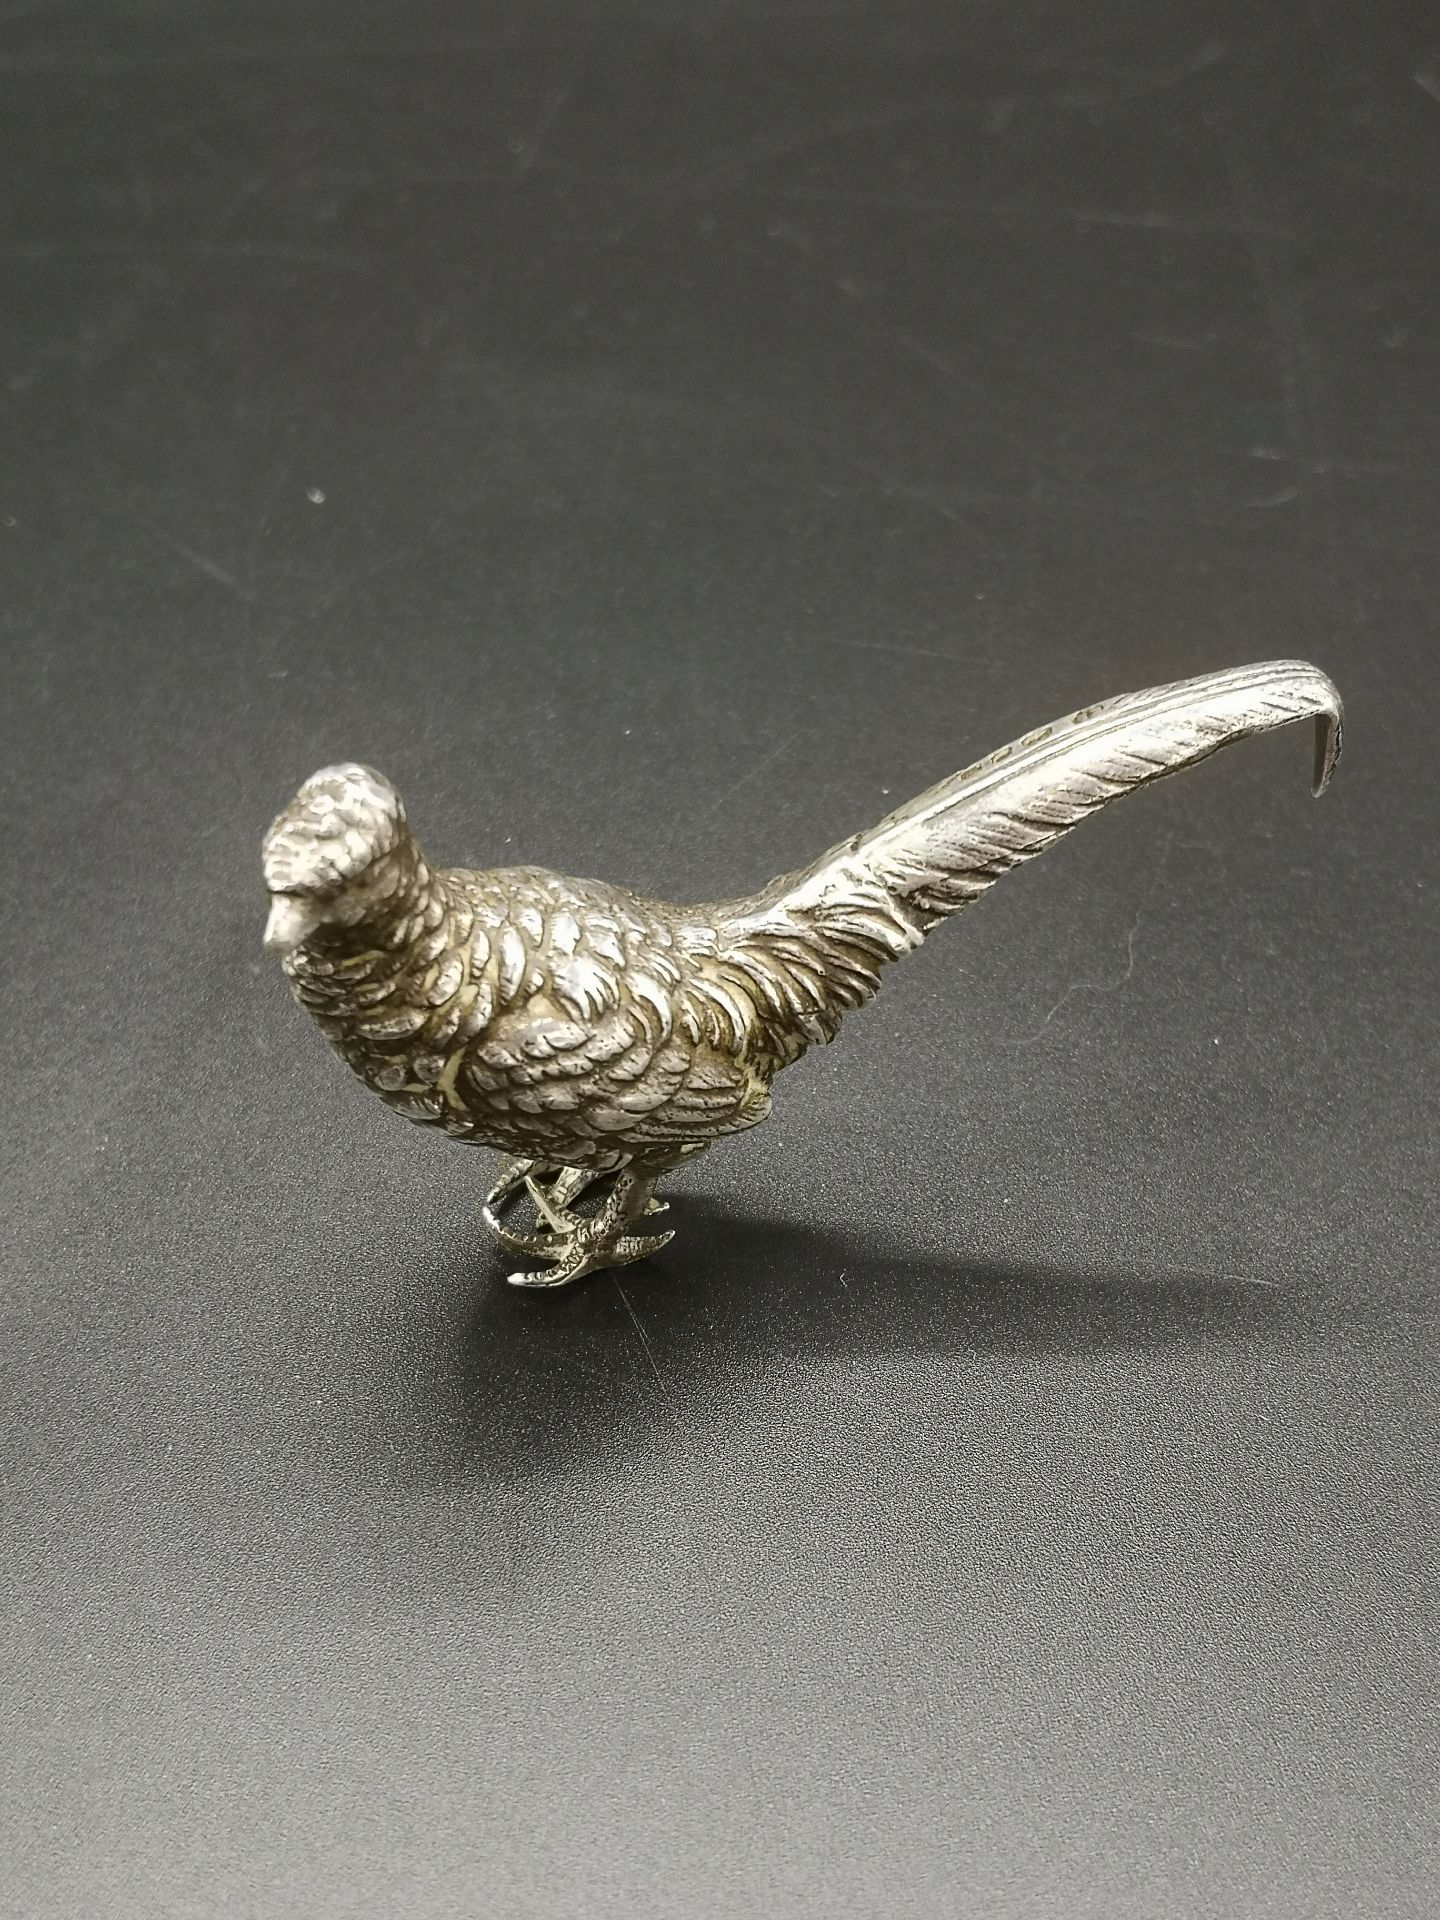 Pair of silver pheasants, a silver cock pheasant and a silver labrador - Image 7 of 7